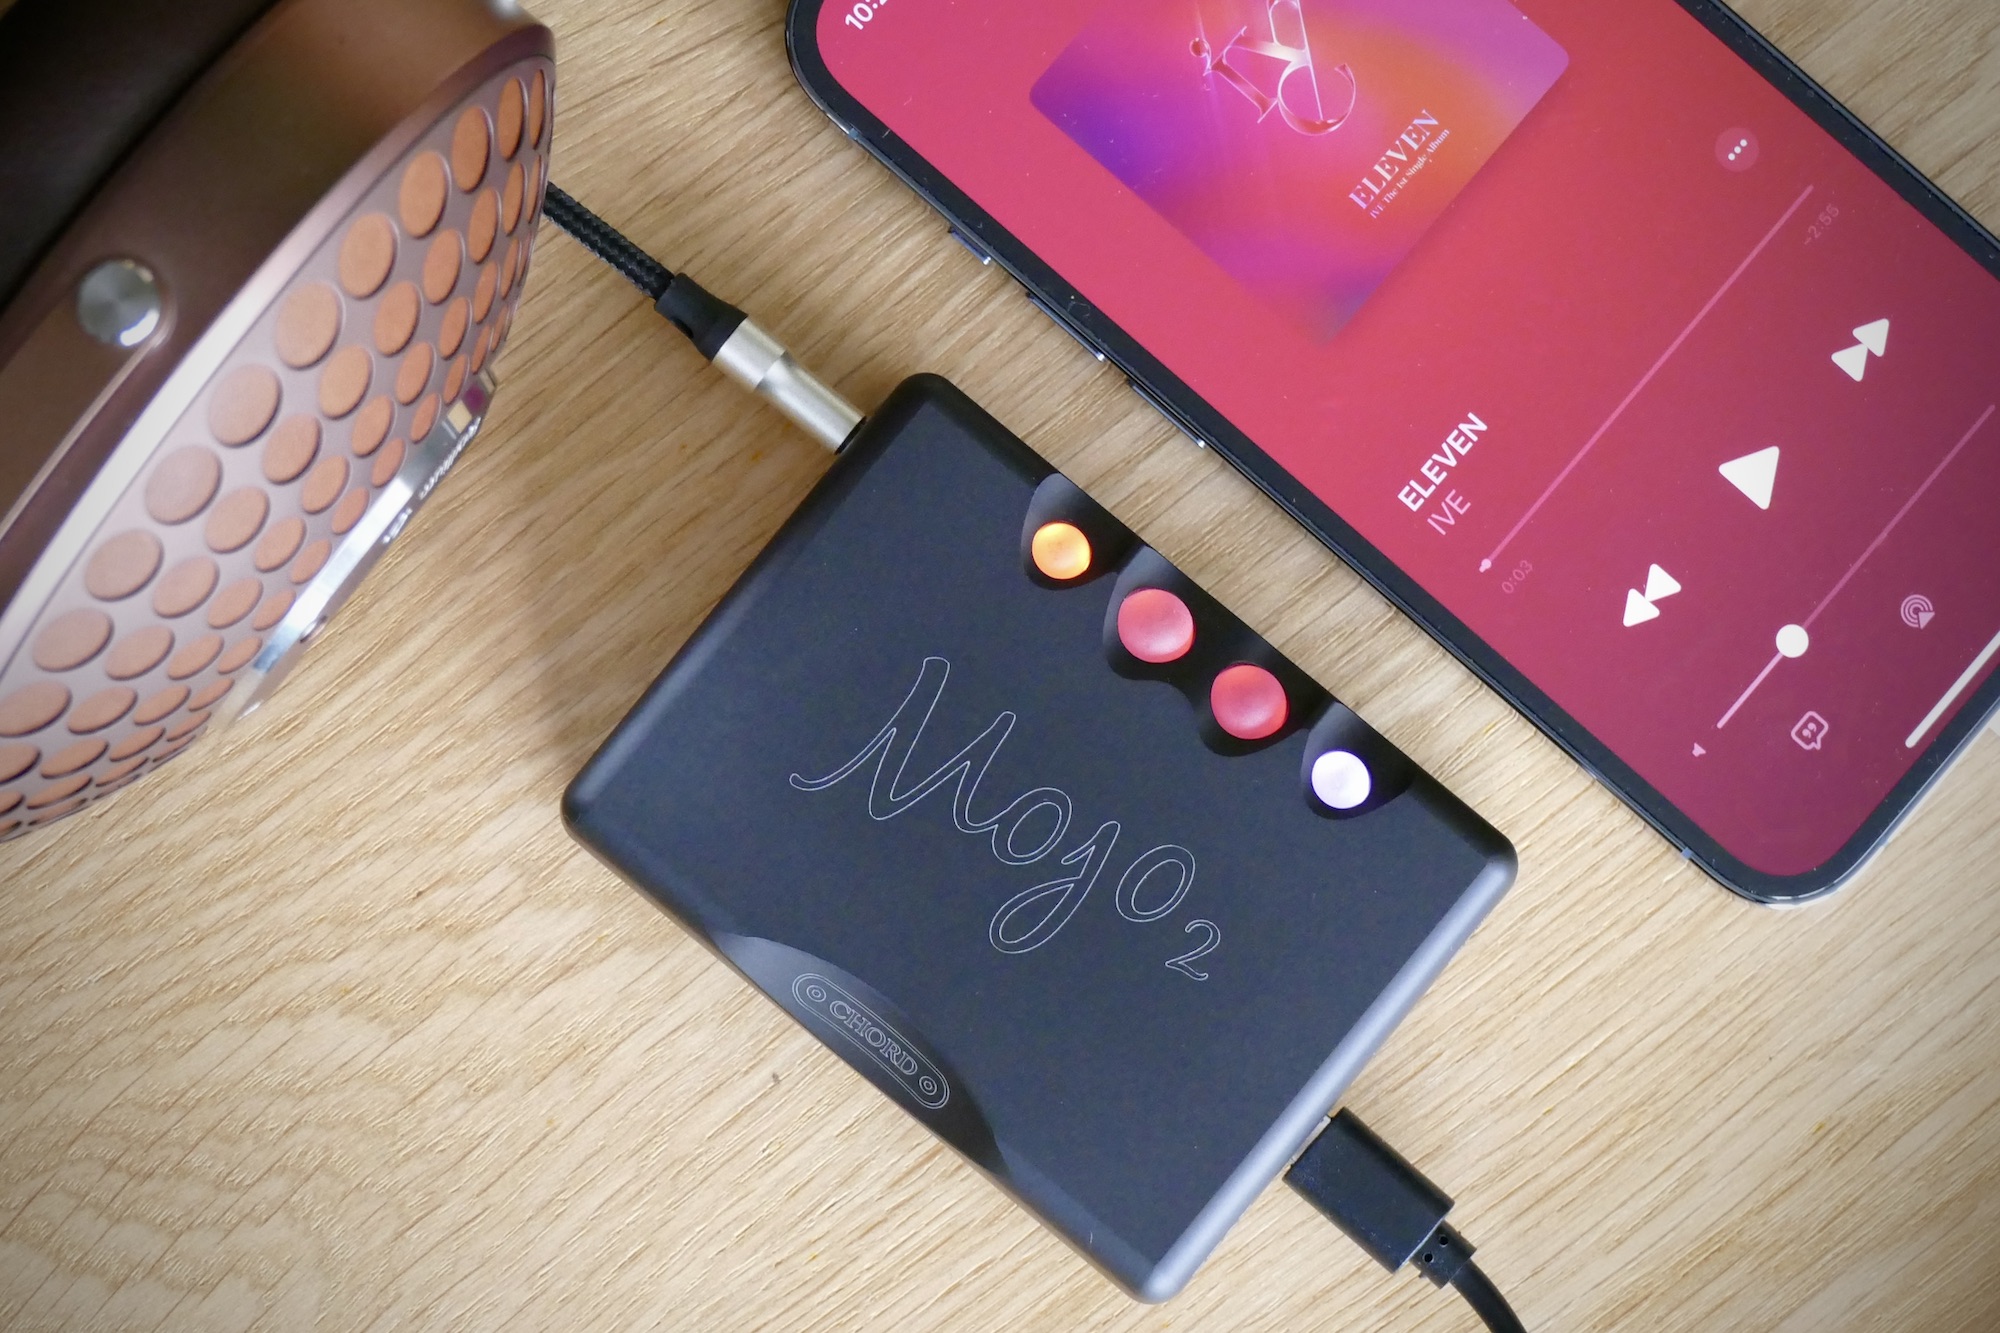 Chord Mojo 2 review: Sound so good, it may move you to tears